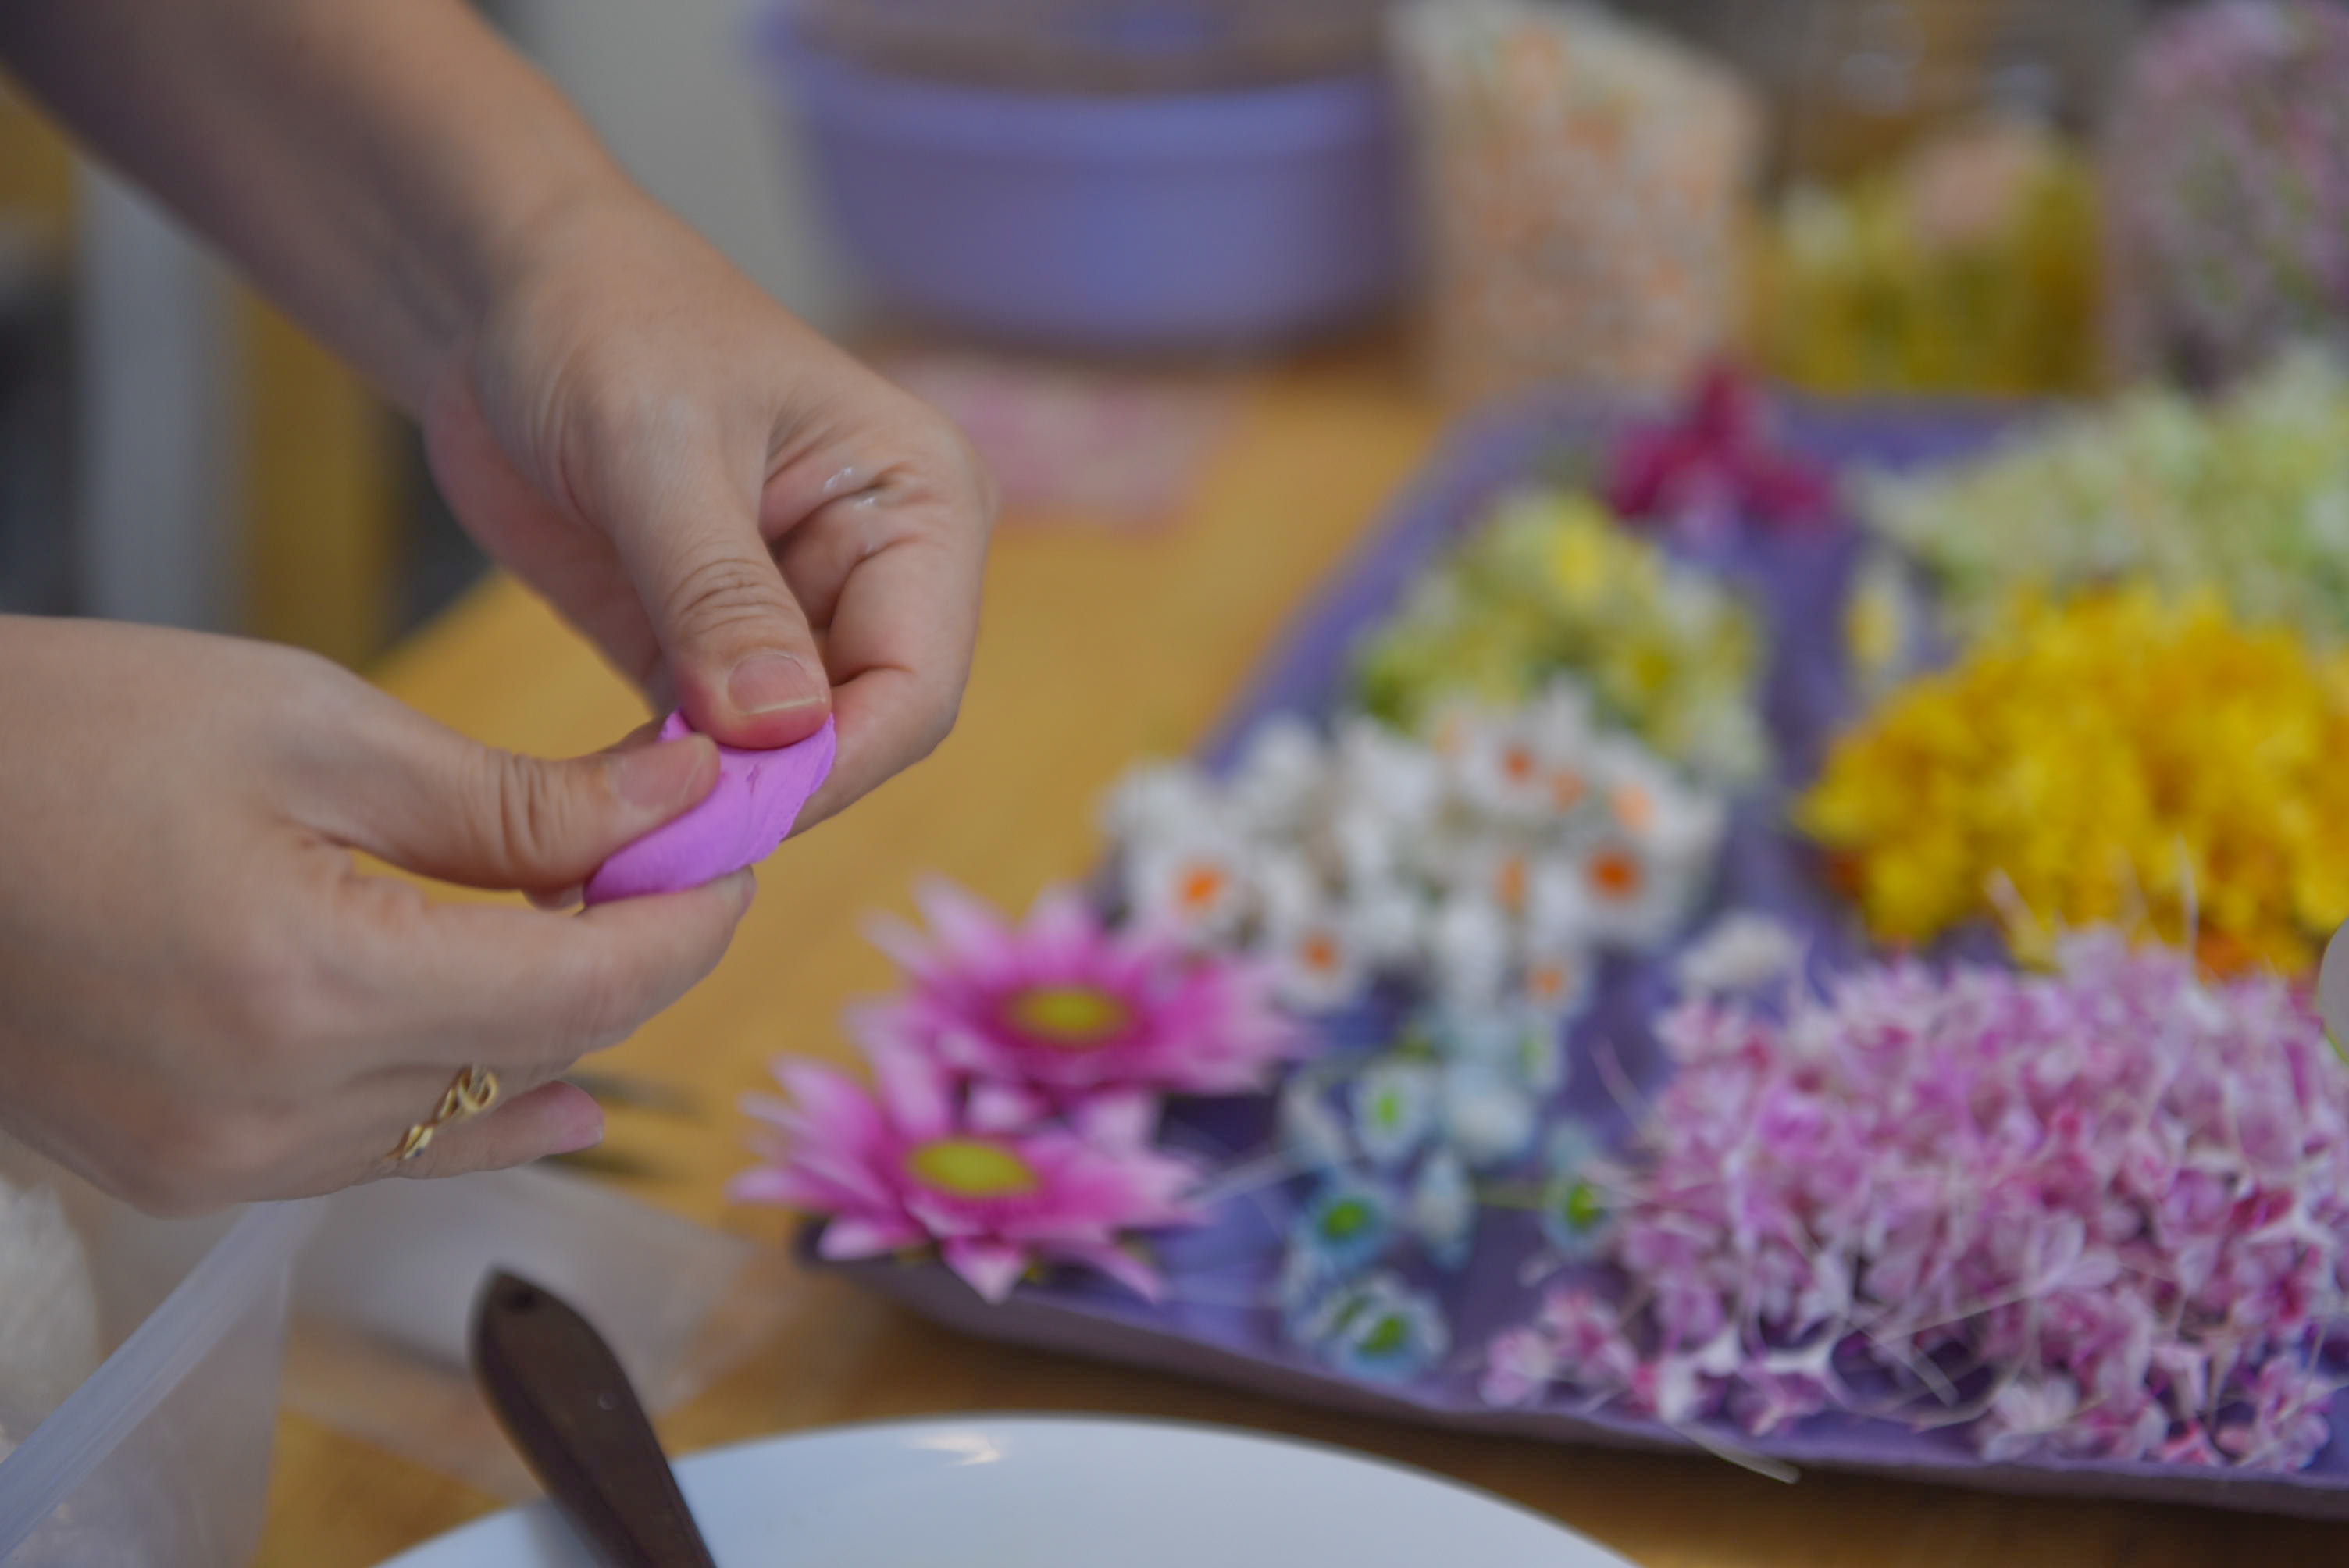 Giang Sinh shapes clay into flowers. Photo: Ngoc Phuong / Tuoi Tre News